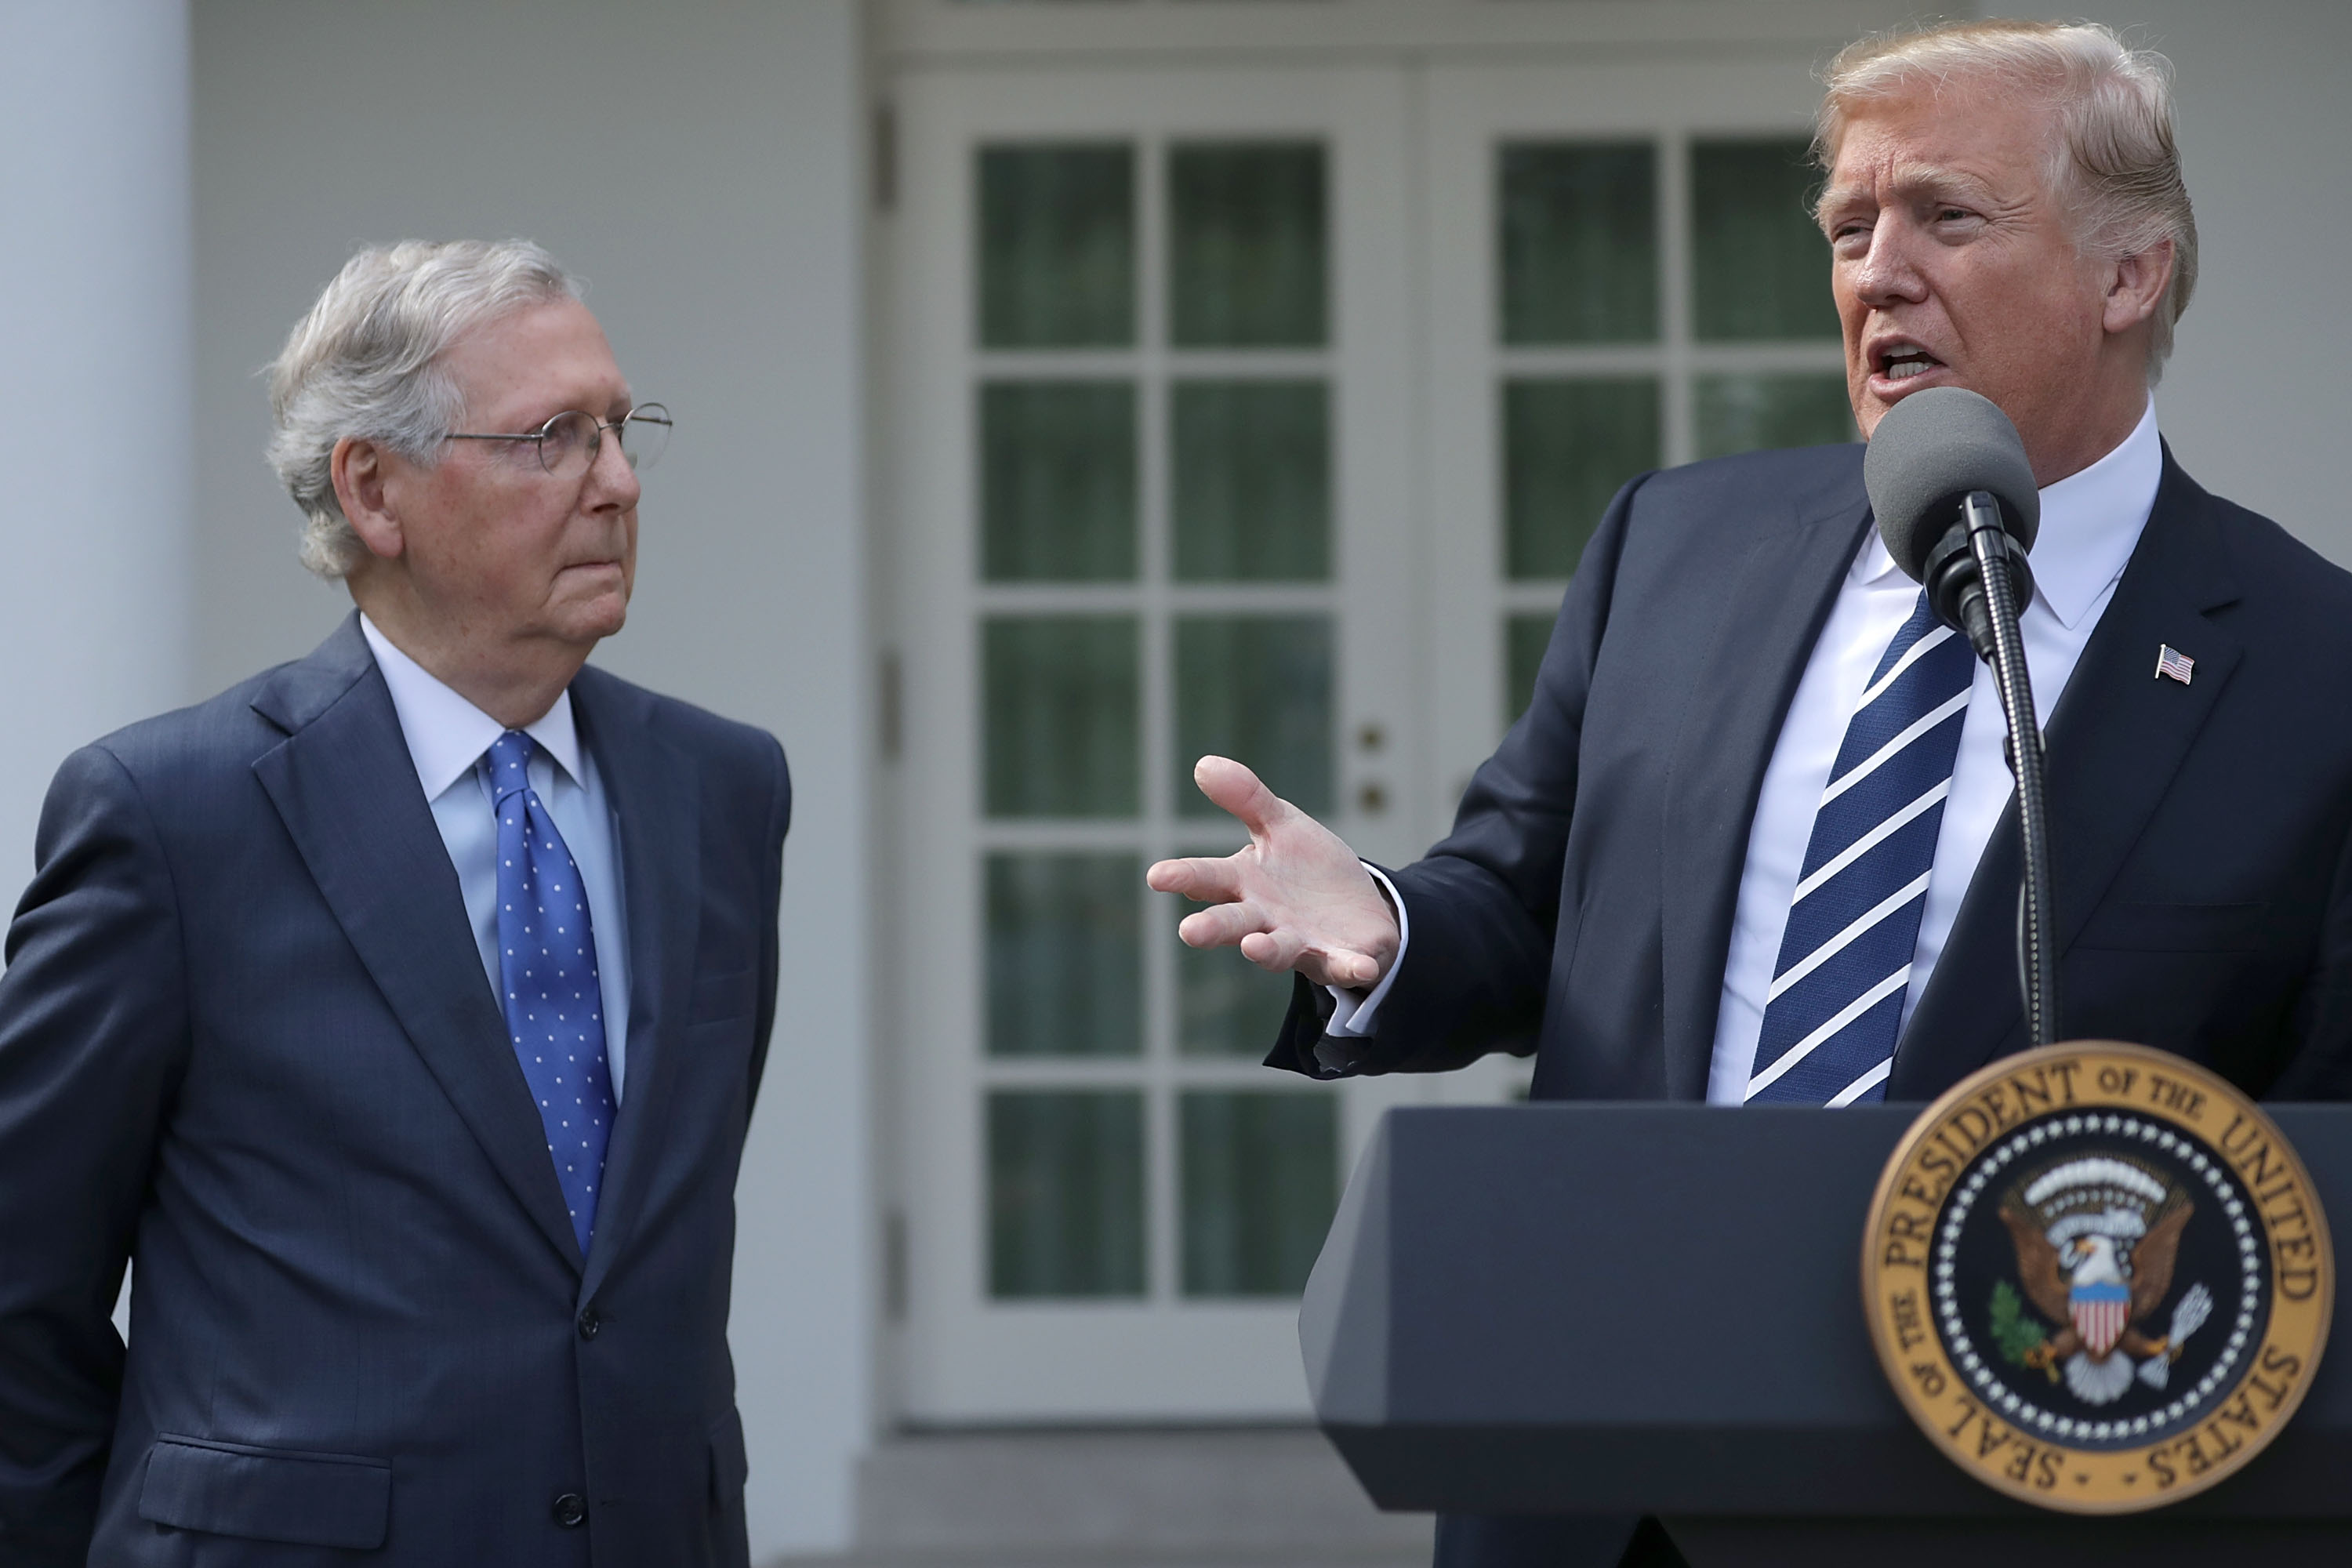 President Trump and Mitch McConnell in the Rose Garden